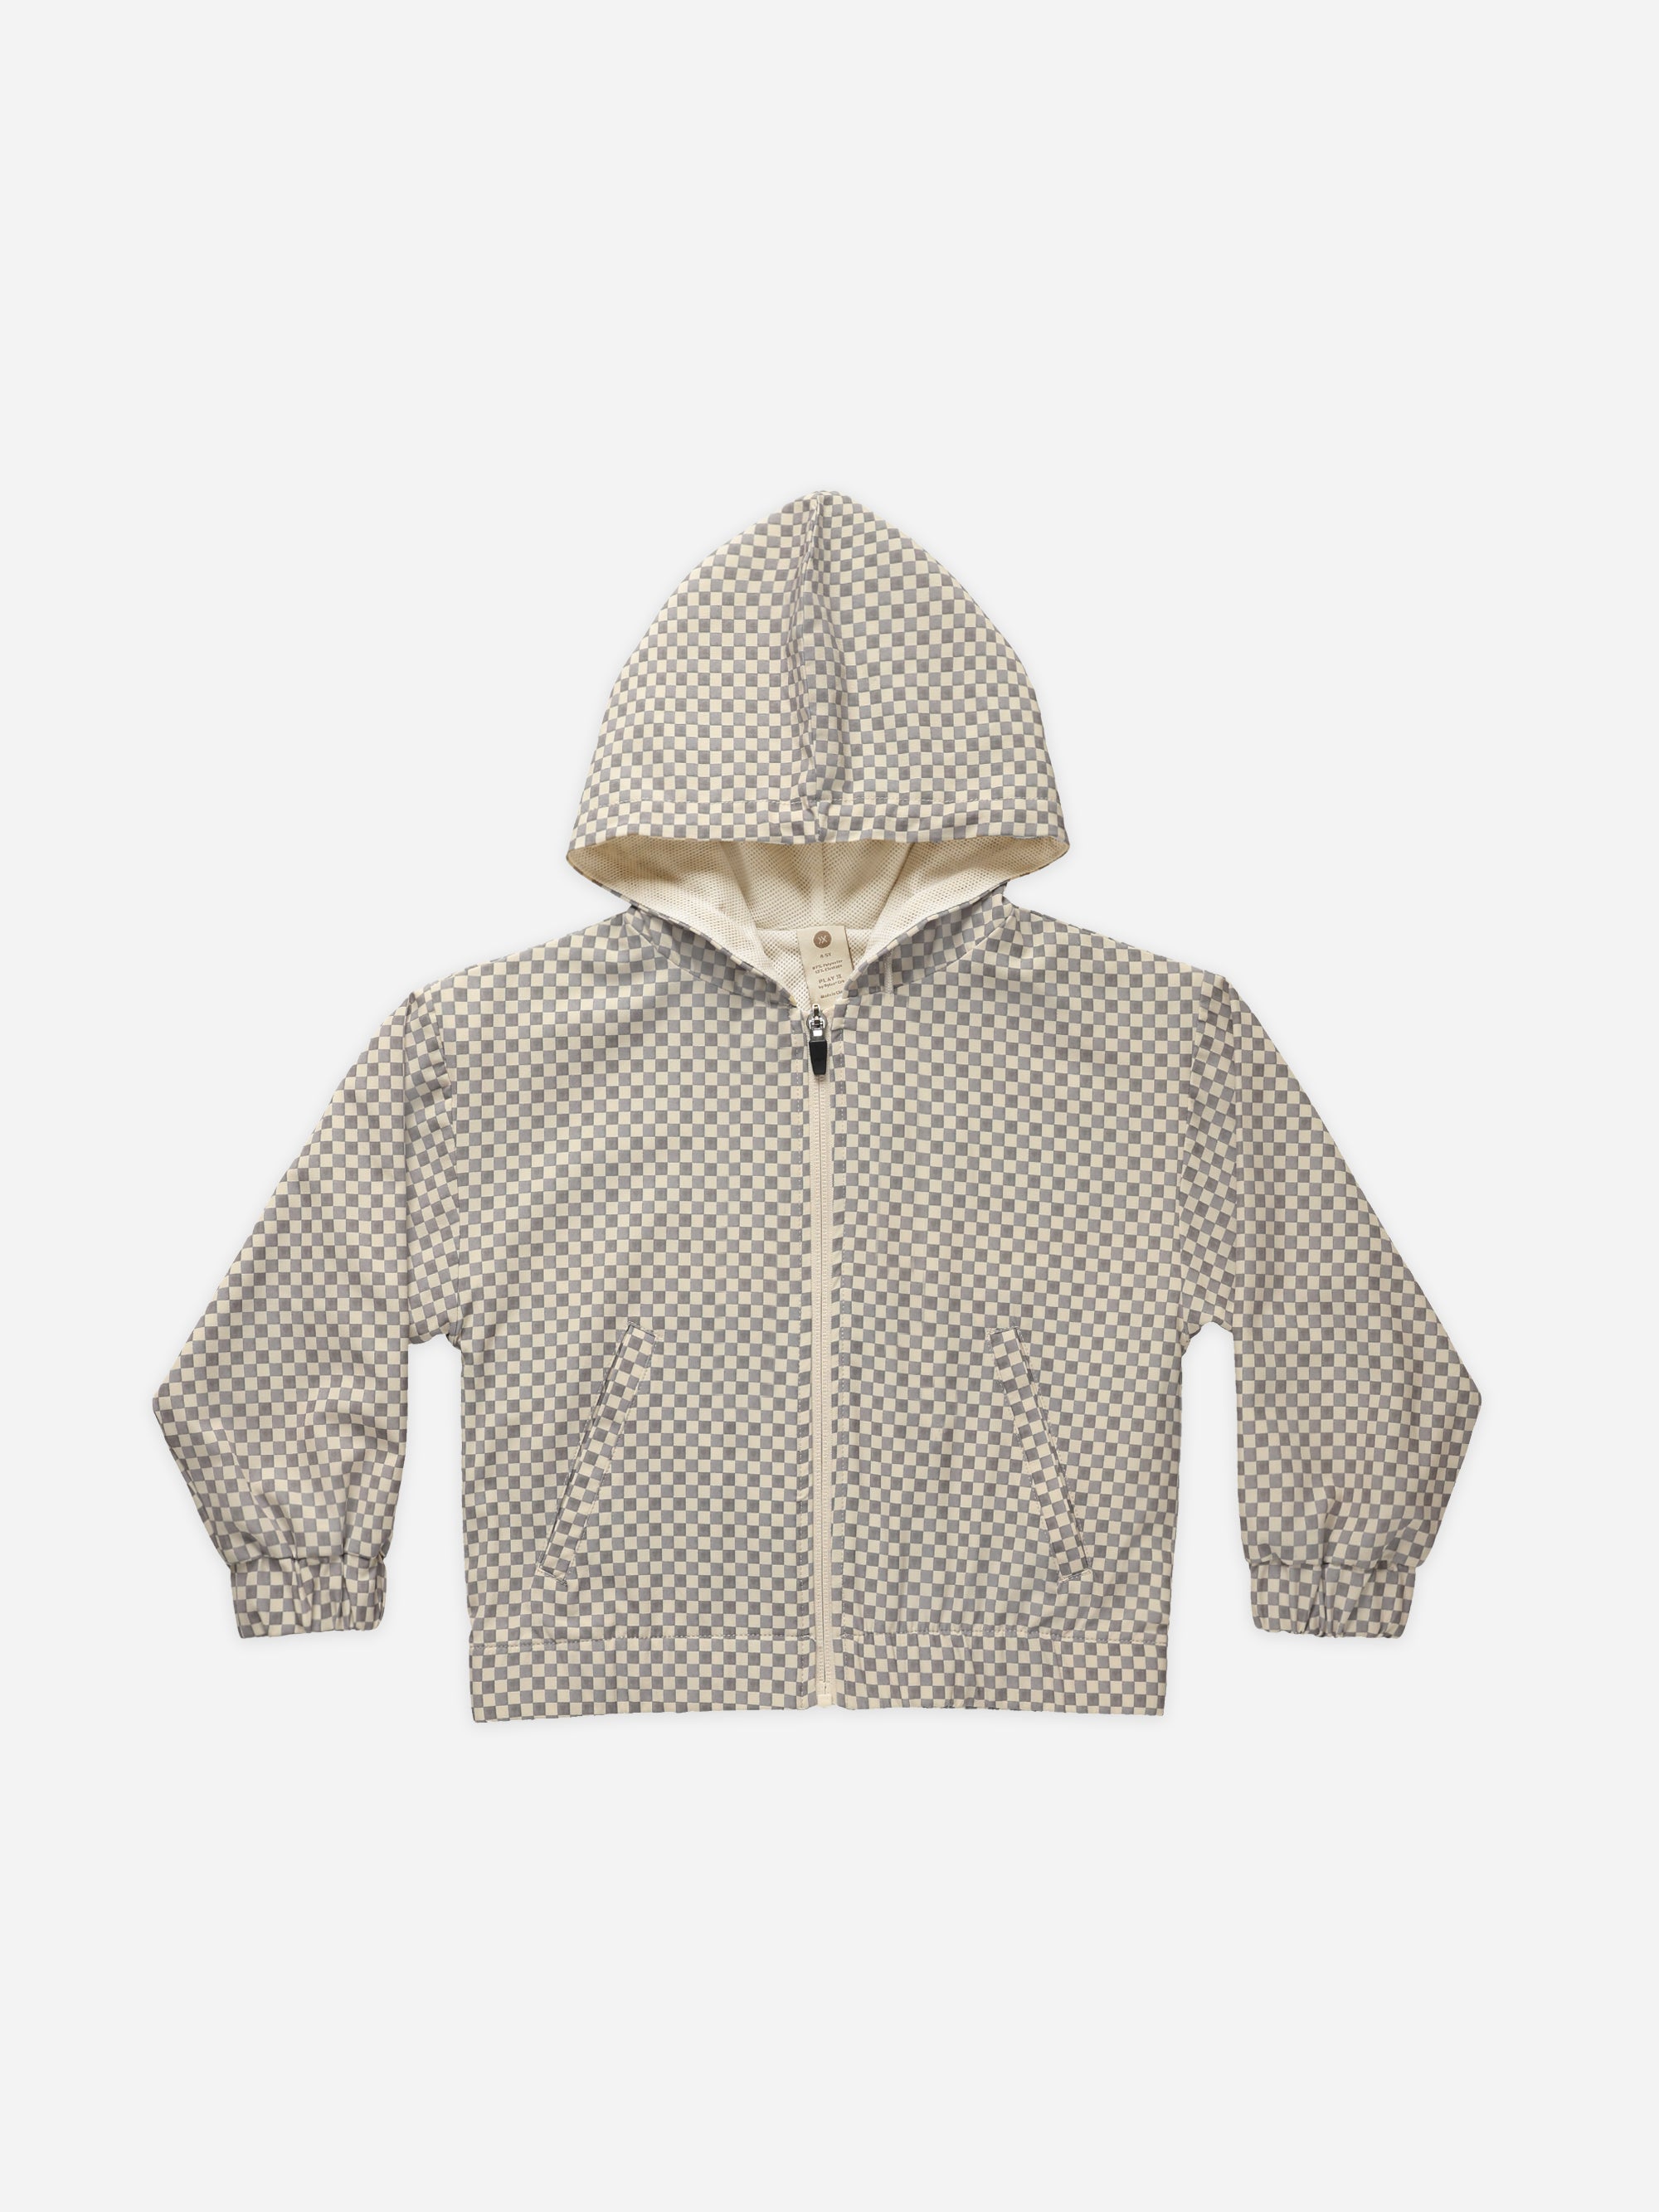 Hooded Windbreaker || Grey Micro Check - Rylee + Cru | Kids Clothes | Trendy Baby Clothes | Modern Infant Outfits |